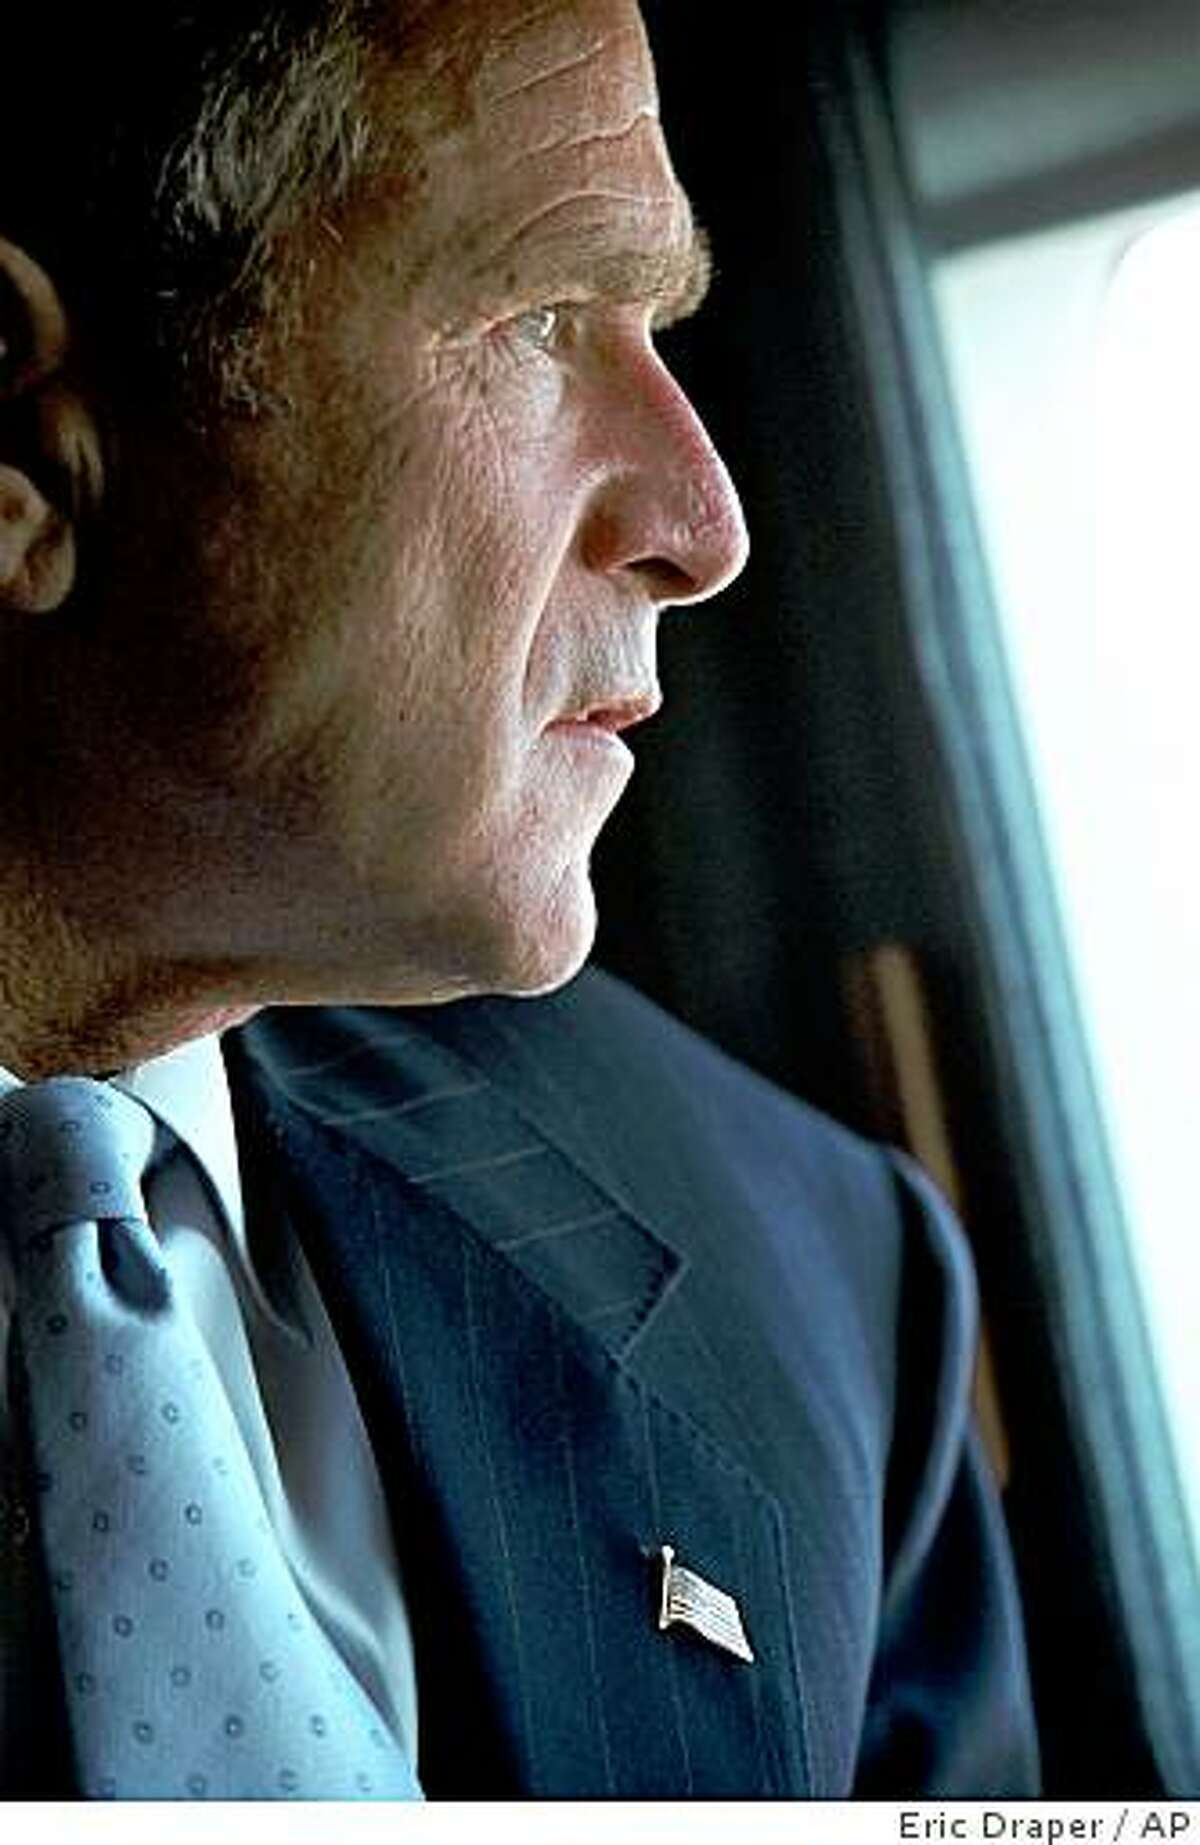 President Bush looks at the Pentagon in Washington from Marine One on his way to New York, Friday, Sept. 14, 2001. Bush faces one of the most complicated national security challenges ever to confront a U.S. president in the wake of Tuesday's terrorist attacks on the Pentagon and the World Trade Center towers in New York.